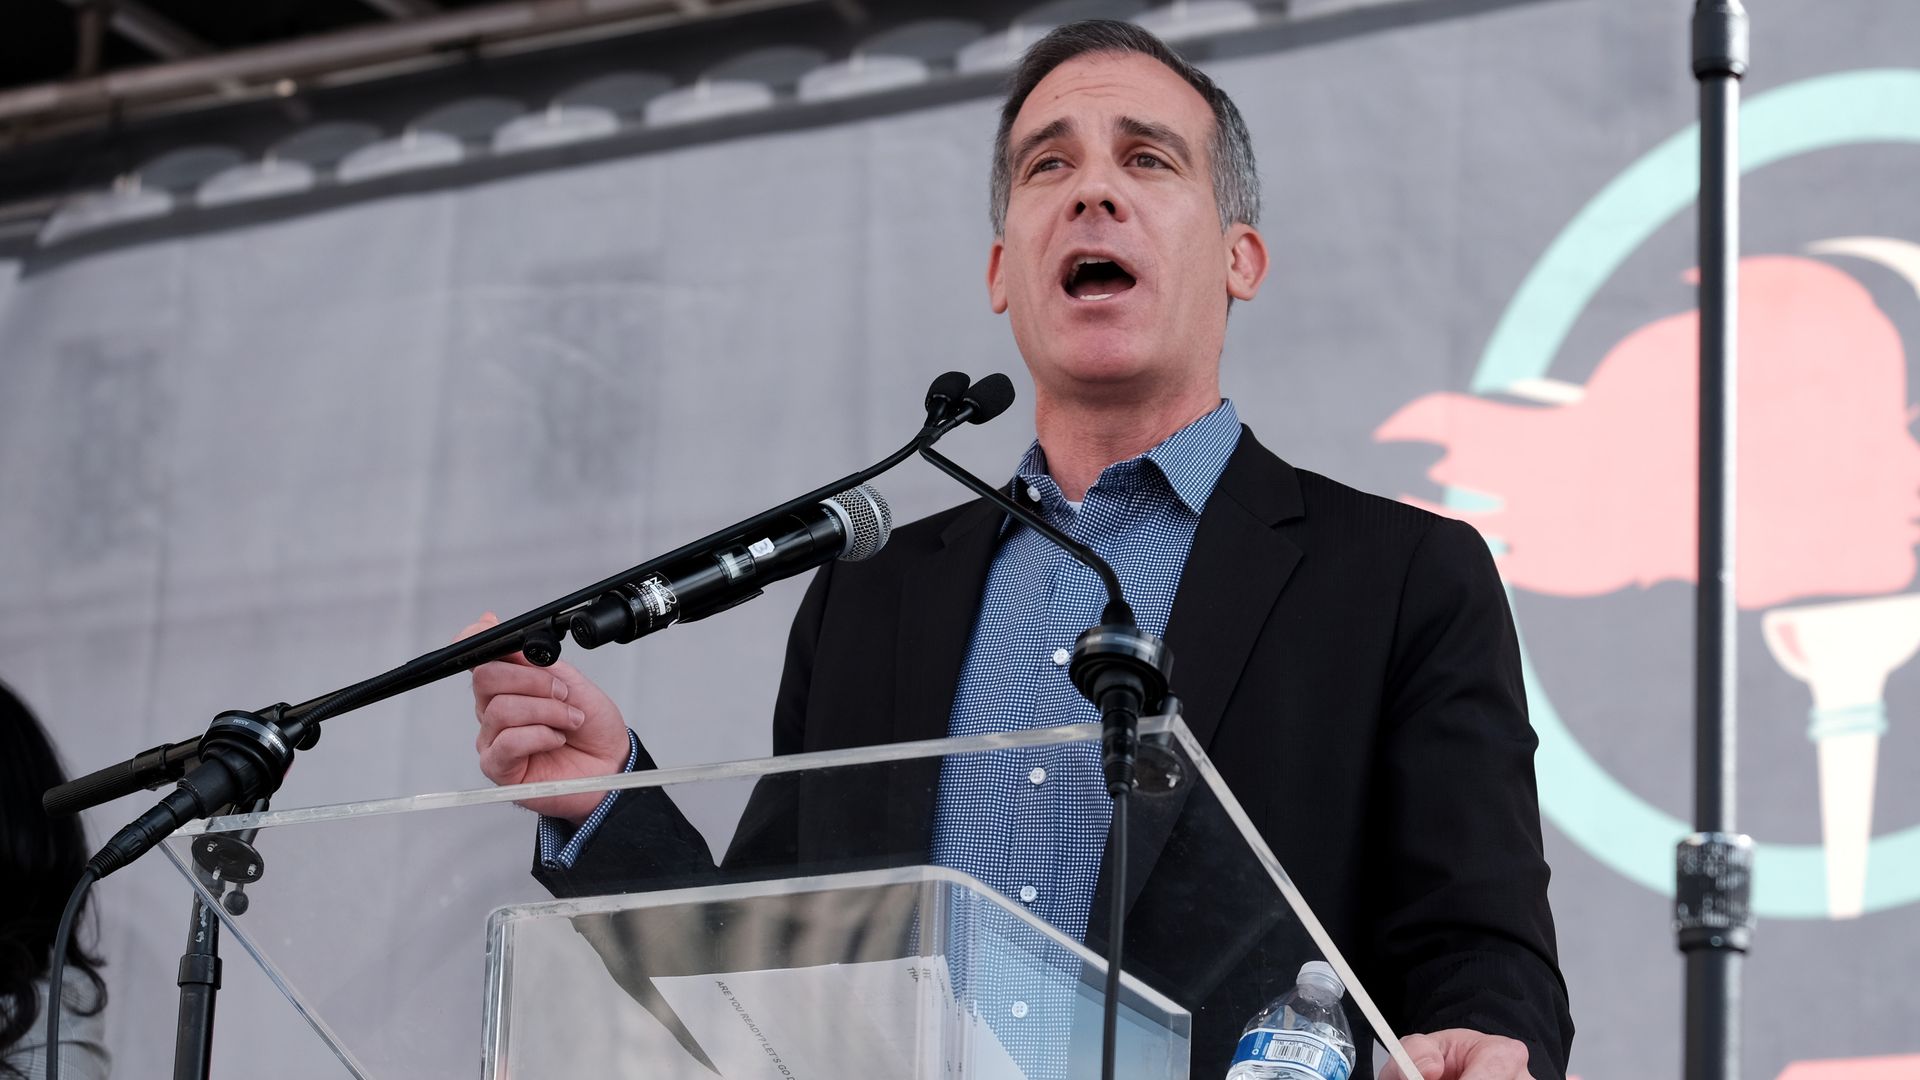  Los Angeles Mayor Eric Garcetti speaks at the 4th Annual Women's March LA: Women Rising at Pershing Square on January 18, 2020 in Los Angeles